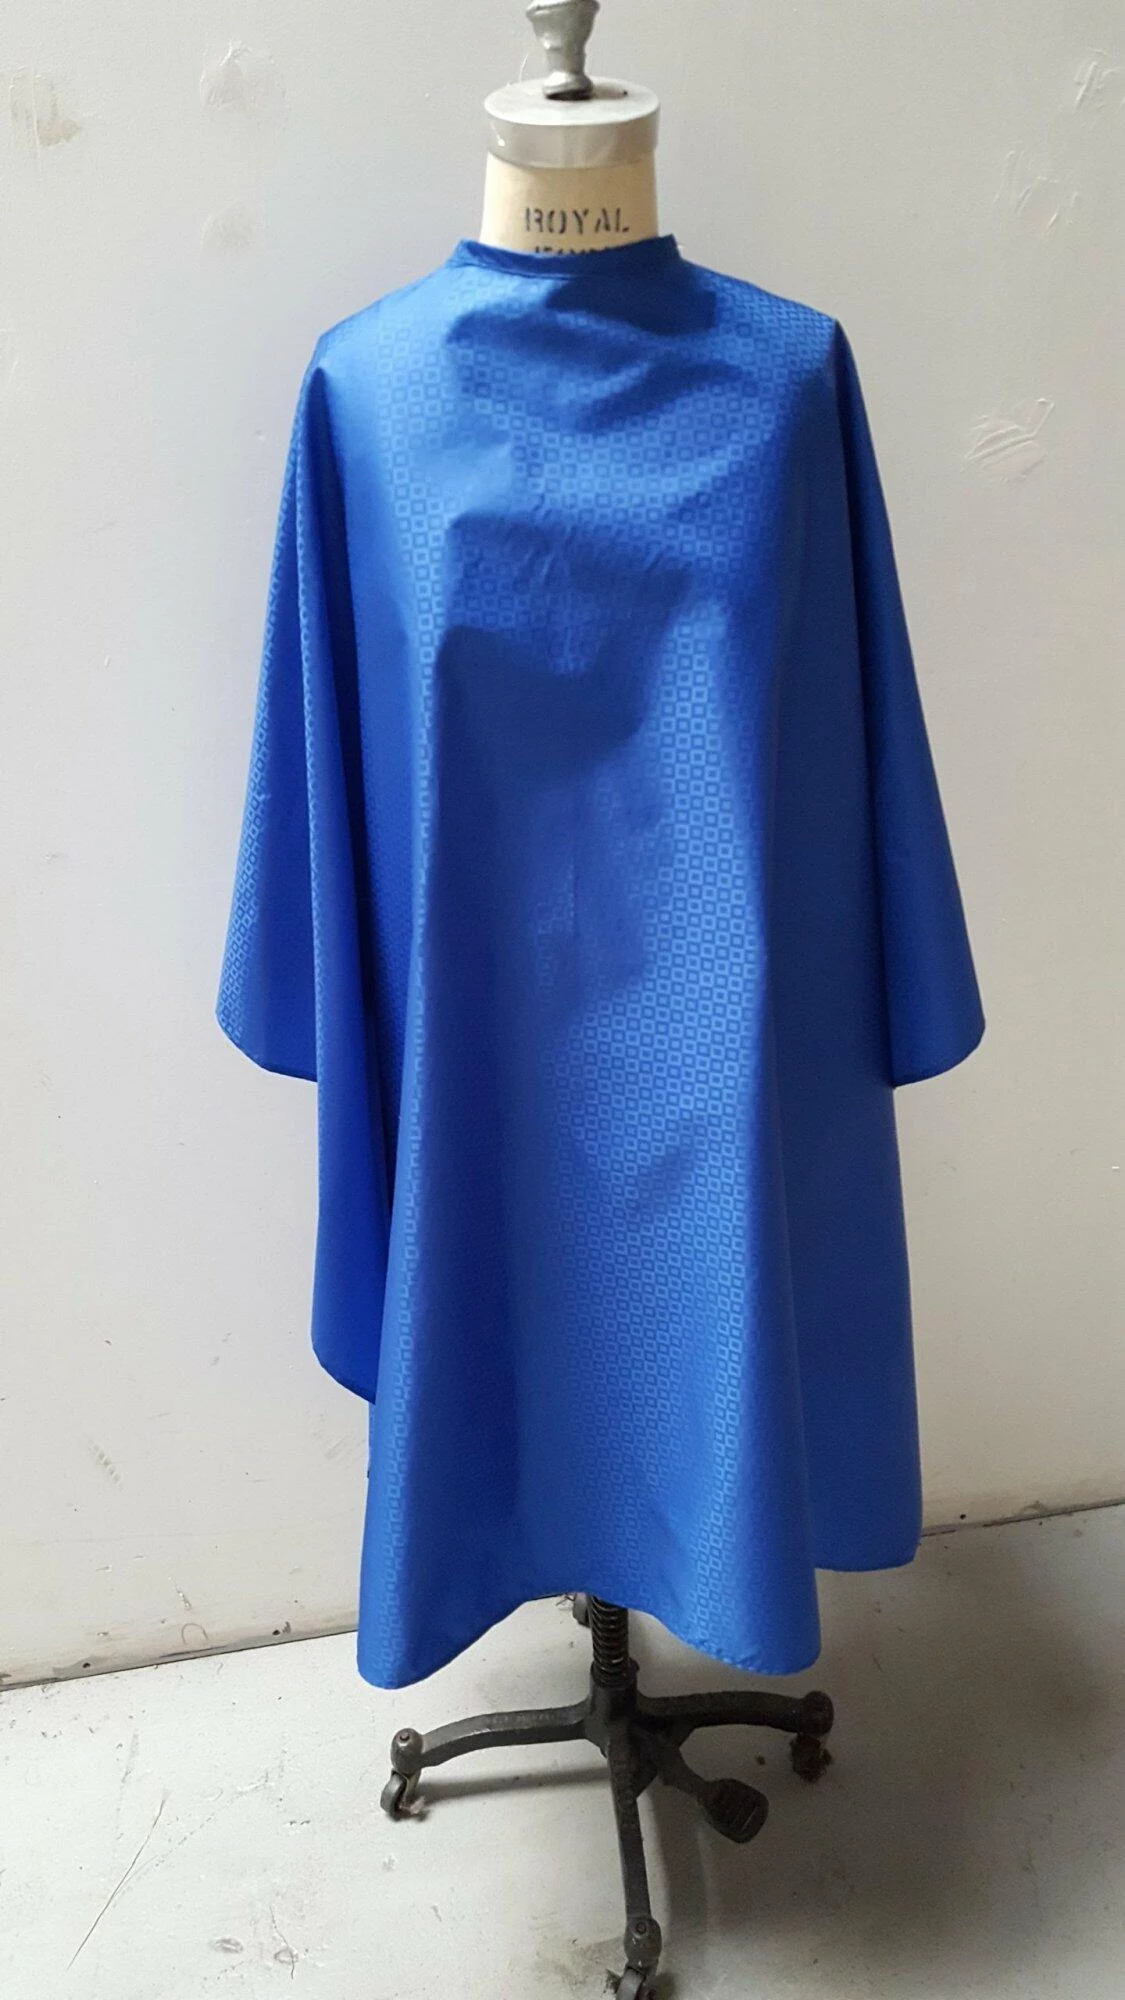 Royal blue cutting cape style # 900